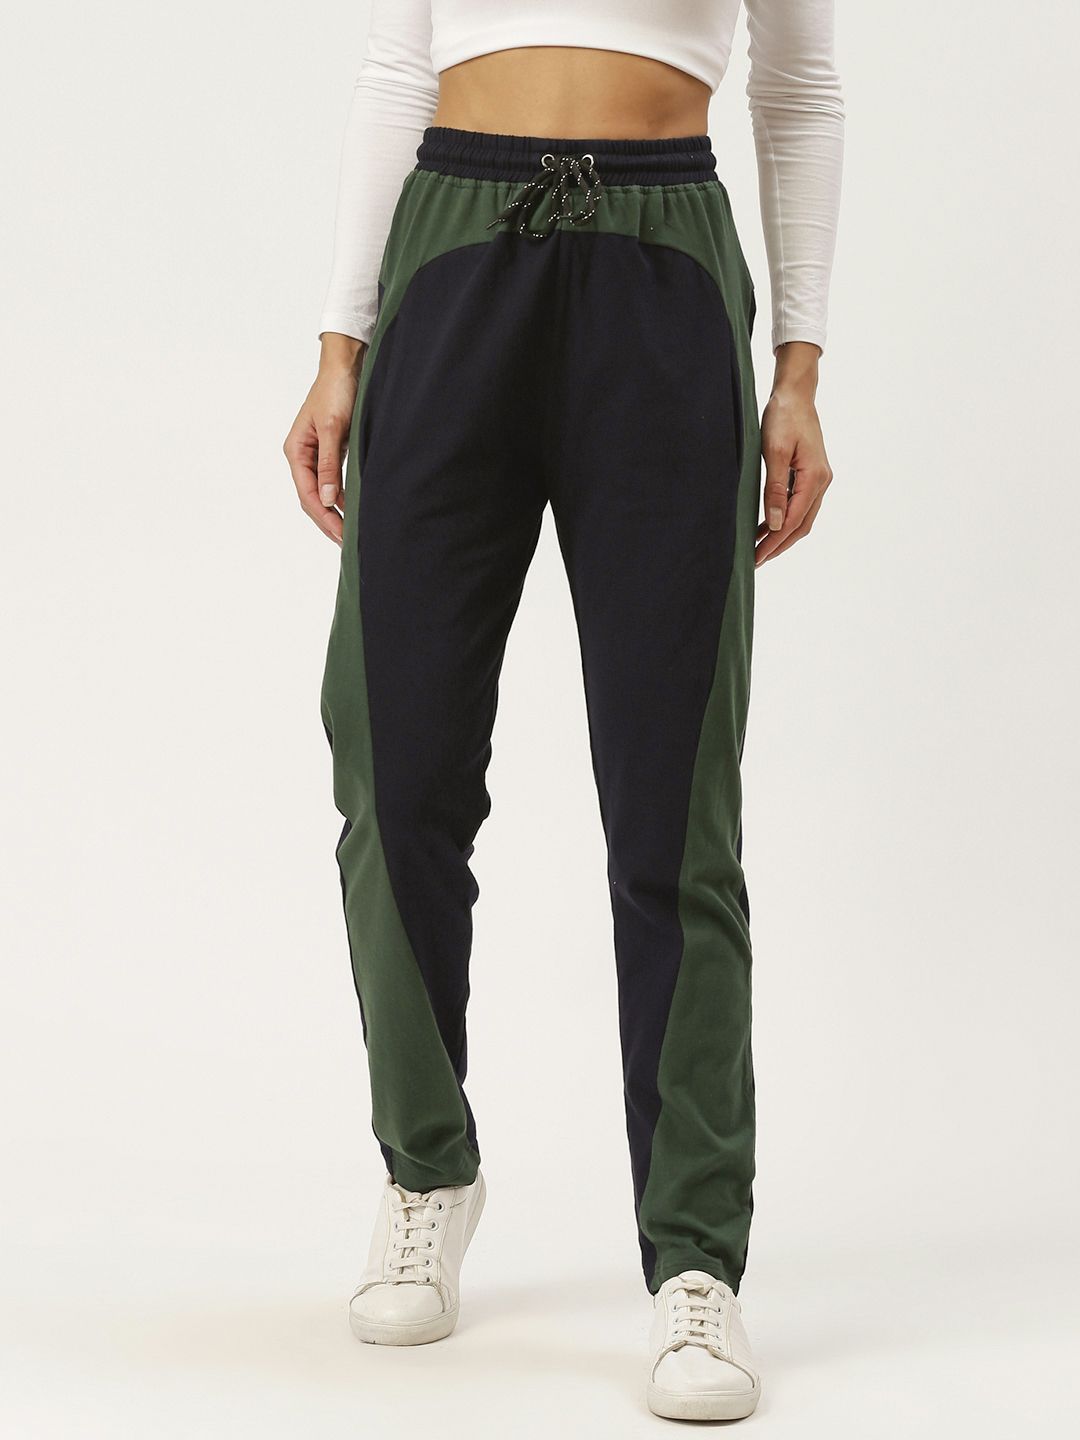 Alsace Lorraine Paris Women Navy Blue & Olive Green Colourblocked Track Pants Price in India